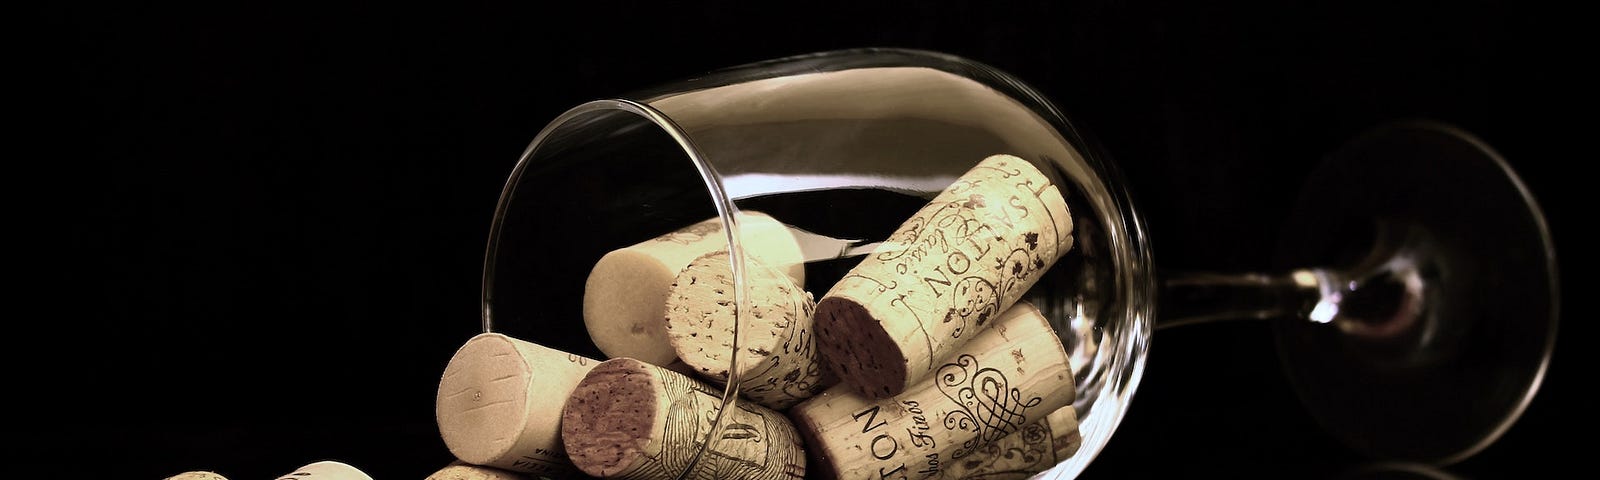 A clean wineglass laying on its side with a dozen corks spilling out, photographed against a black background